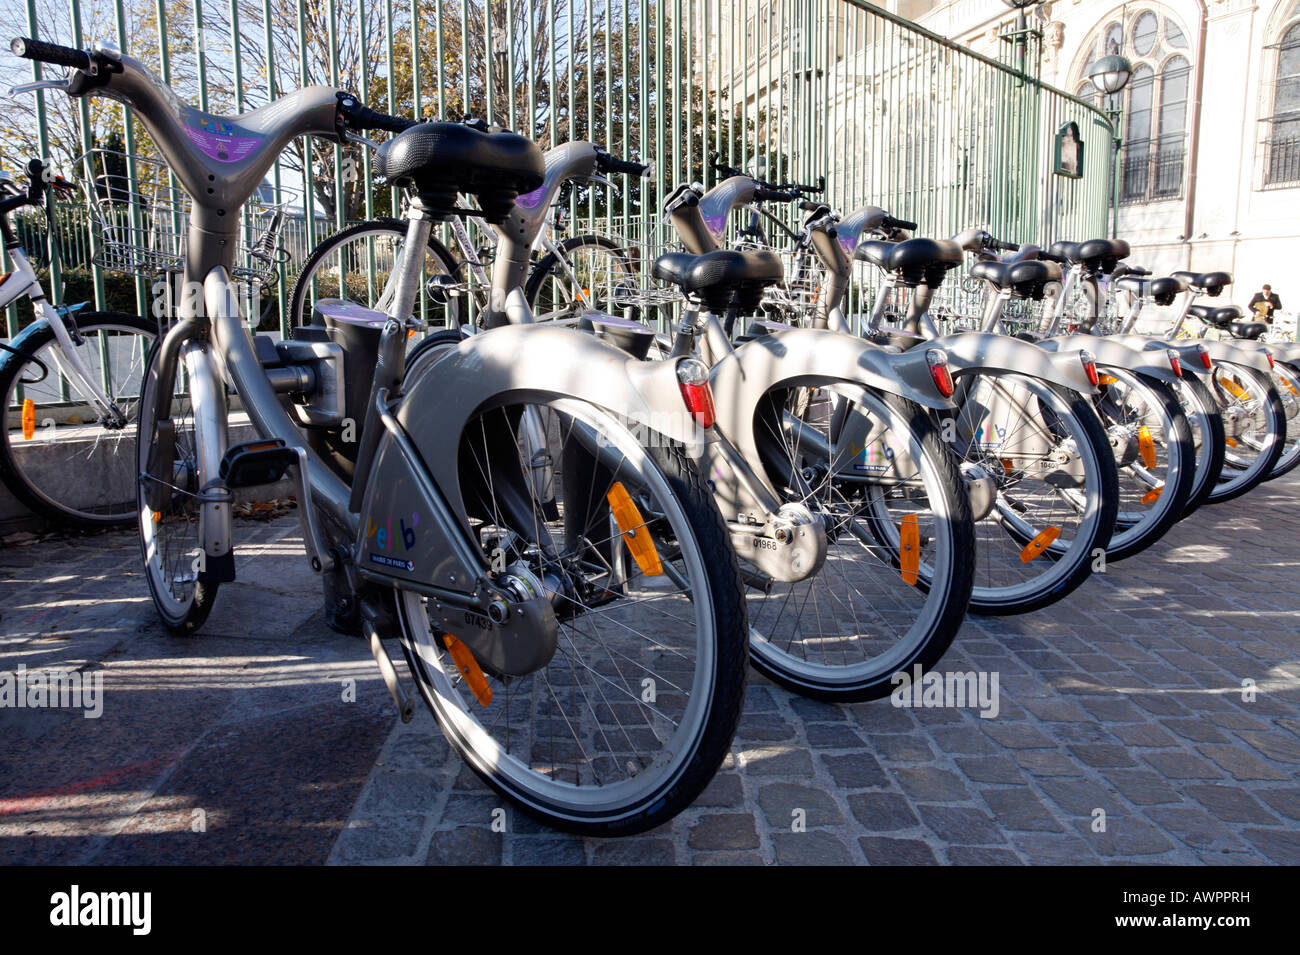 Bicycle rentals for tourists and locals at a location near St. Eustache Church, Les Halles, Paris, France, Europe Stock Photo